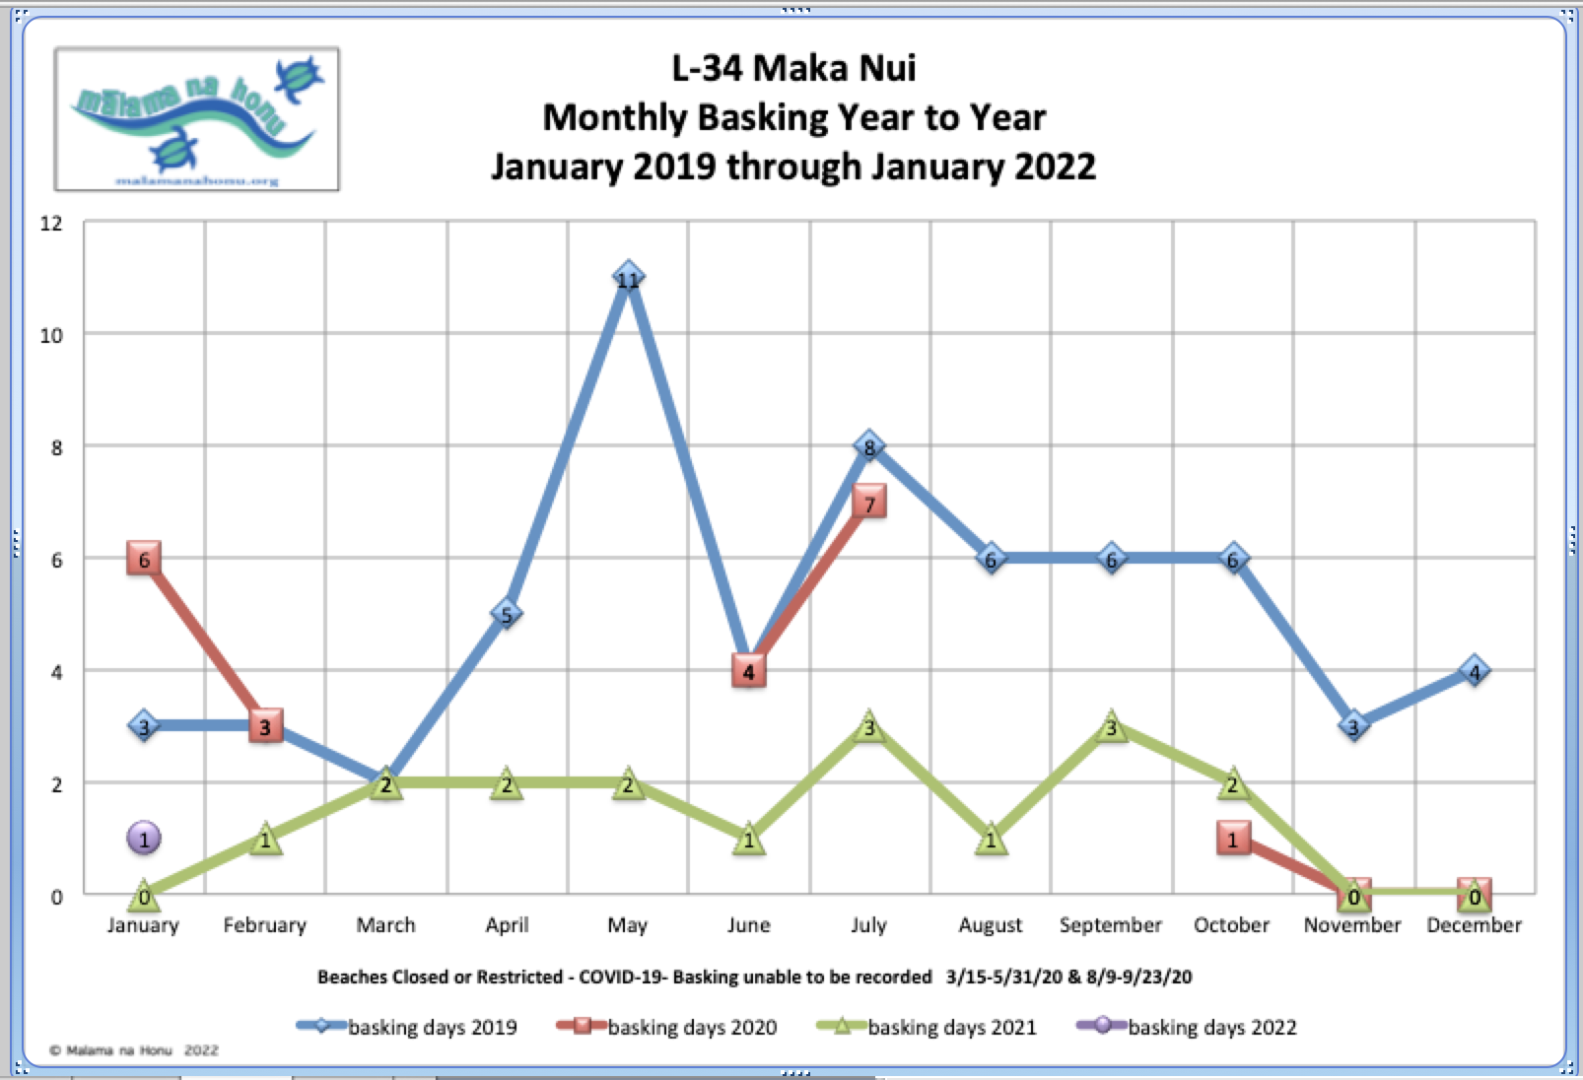 L-34 Maka Nui Monthly Basking Year to Year January 2019 through January 2022